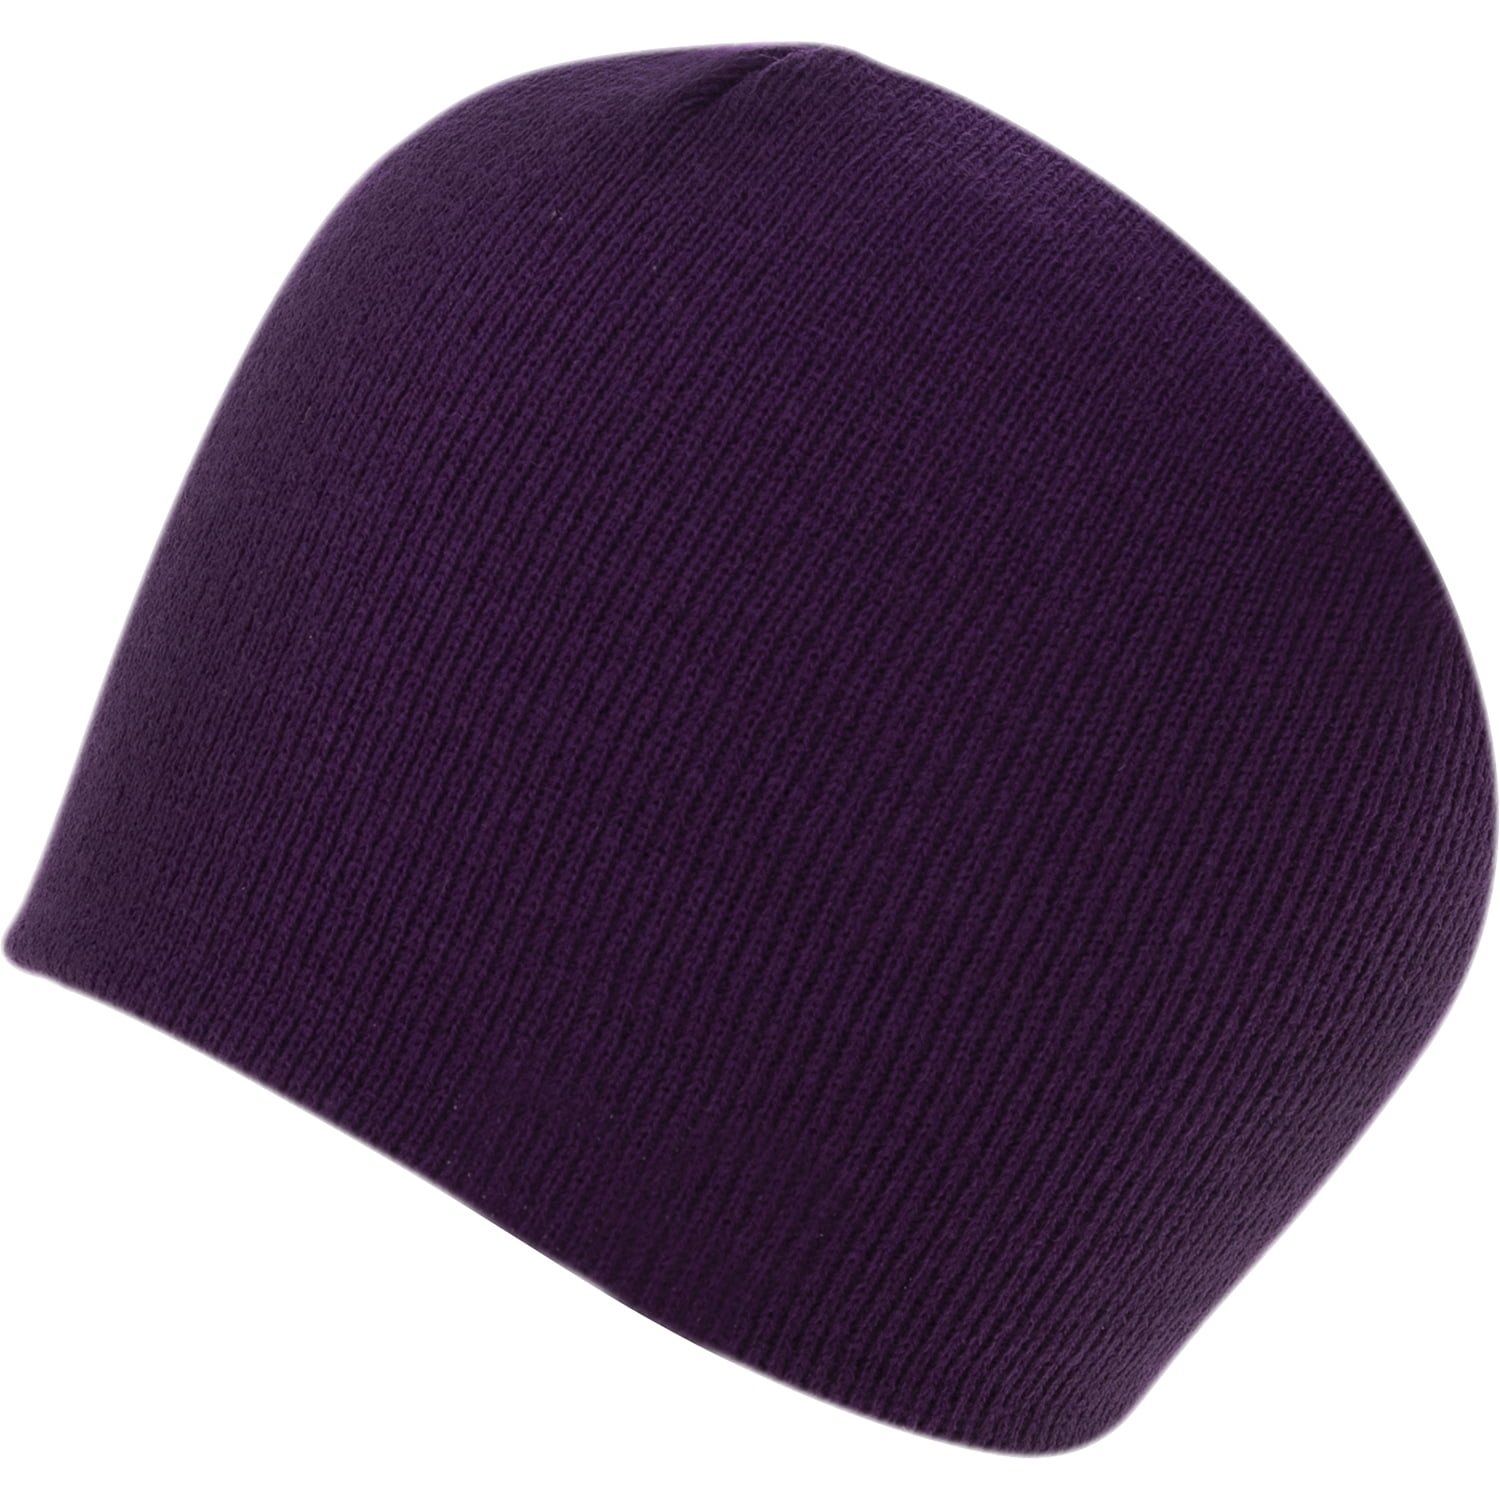 1pc Solid Purple Beanie Winter Knit Hat - Made in USA - Single Piece